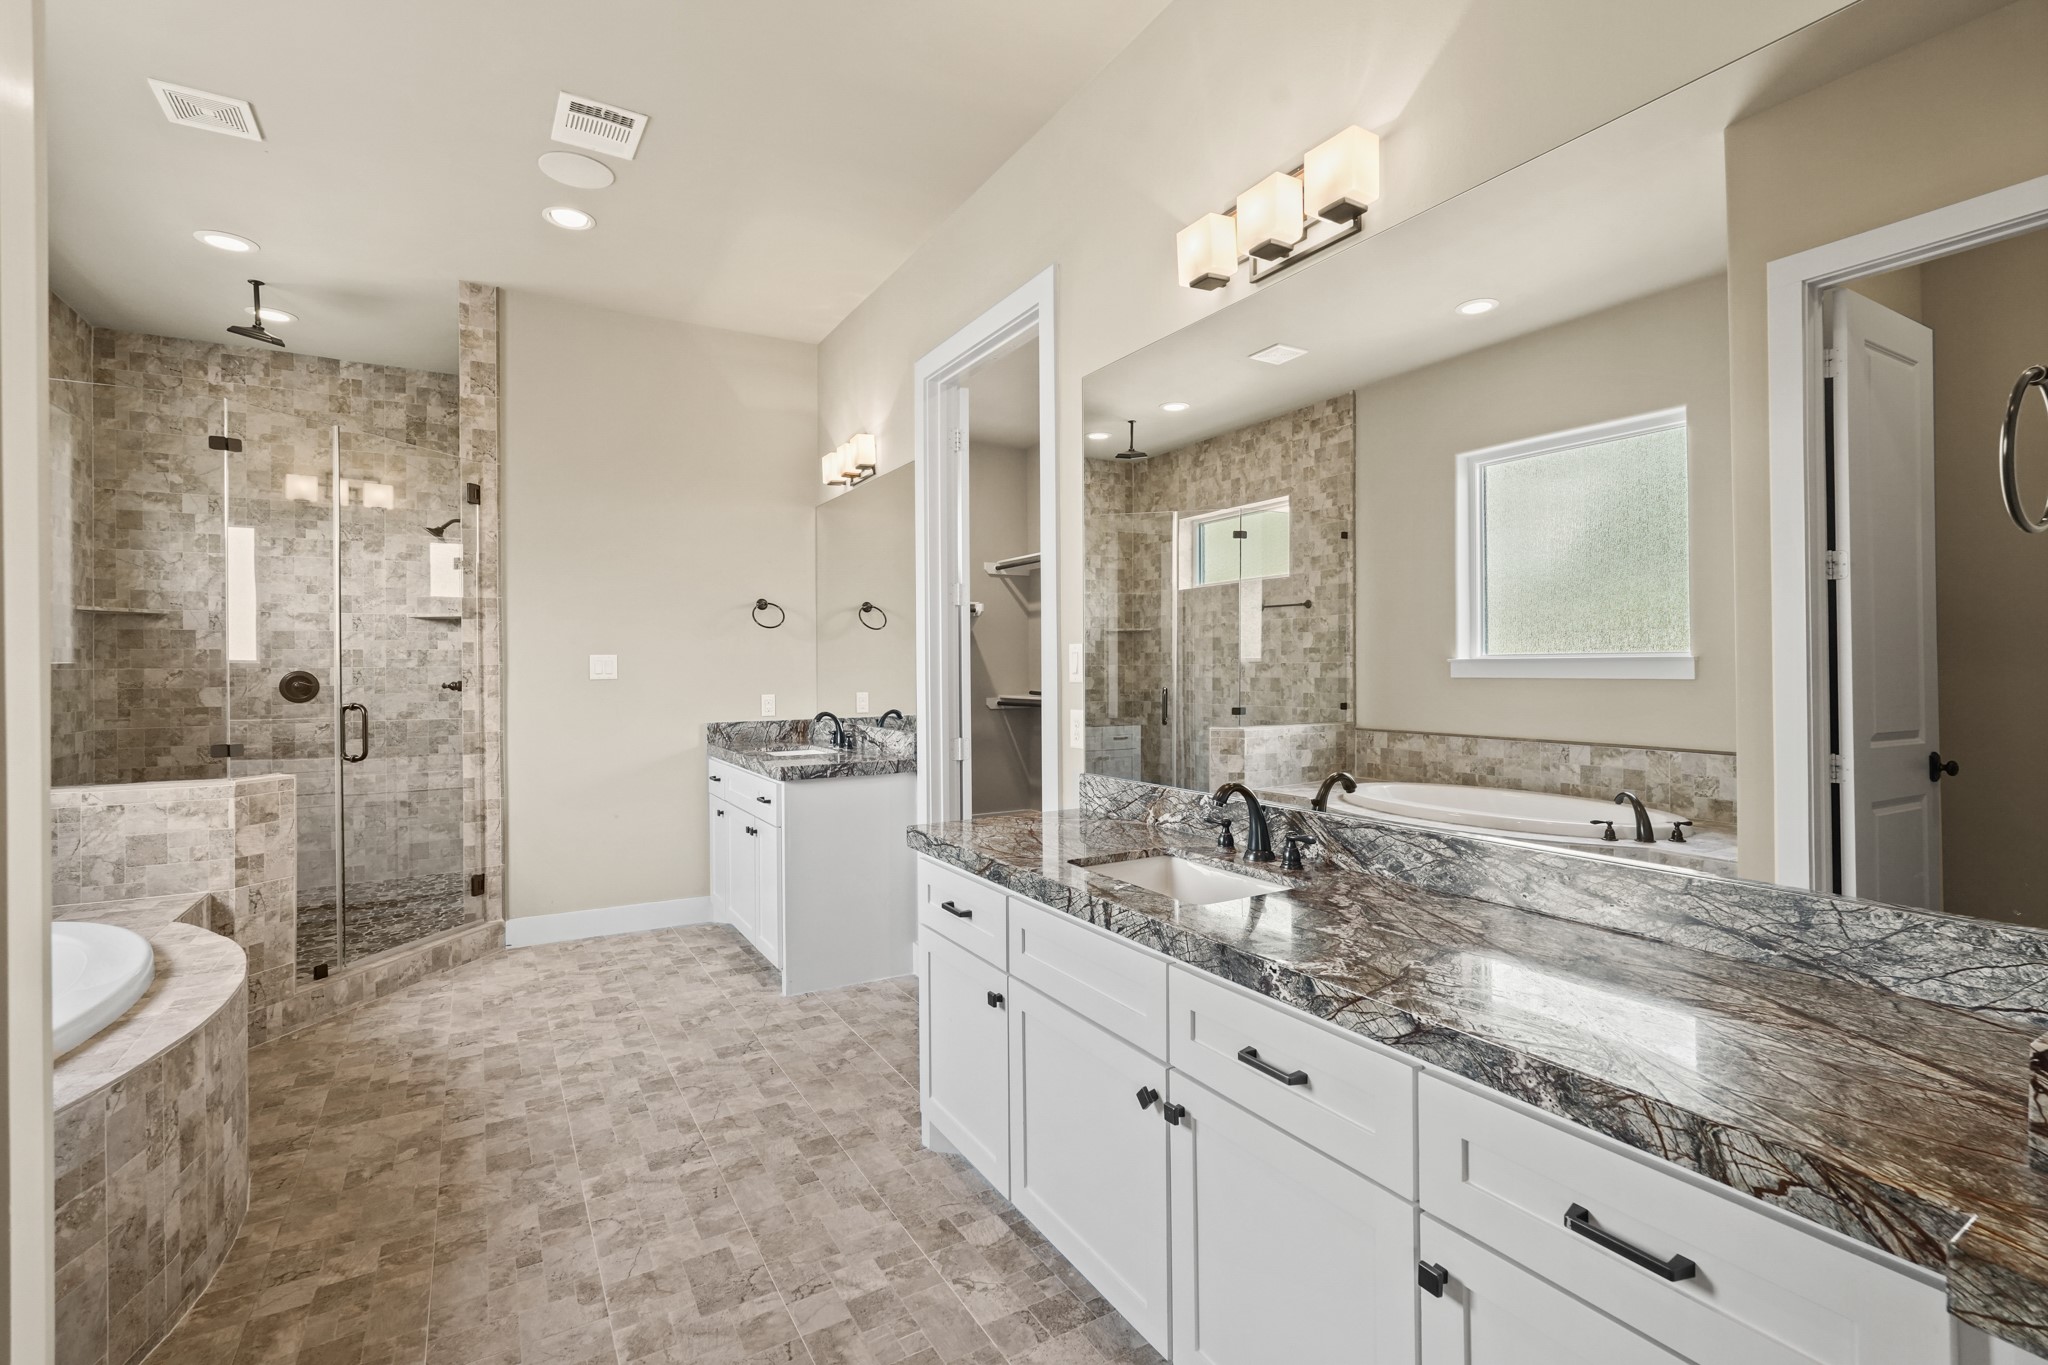 Enchanting ensuite master bathroom features tile and granite countertops throughout.